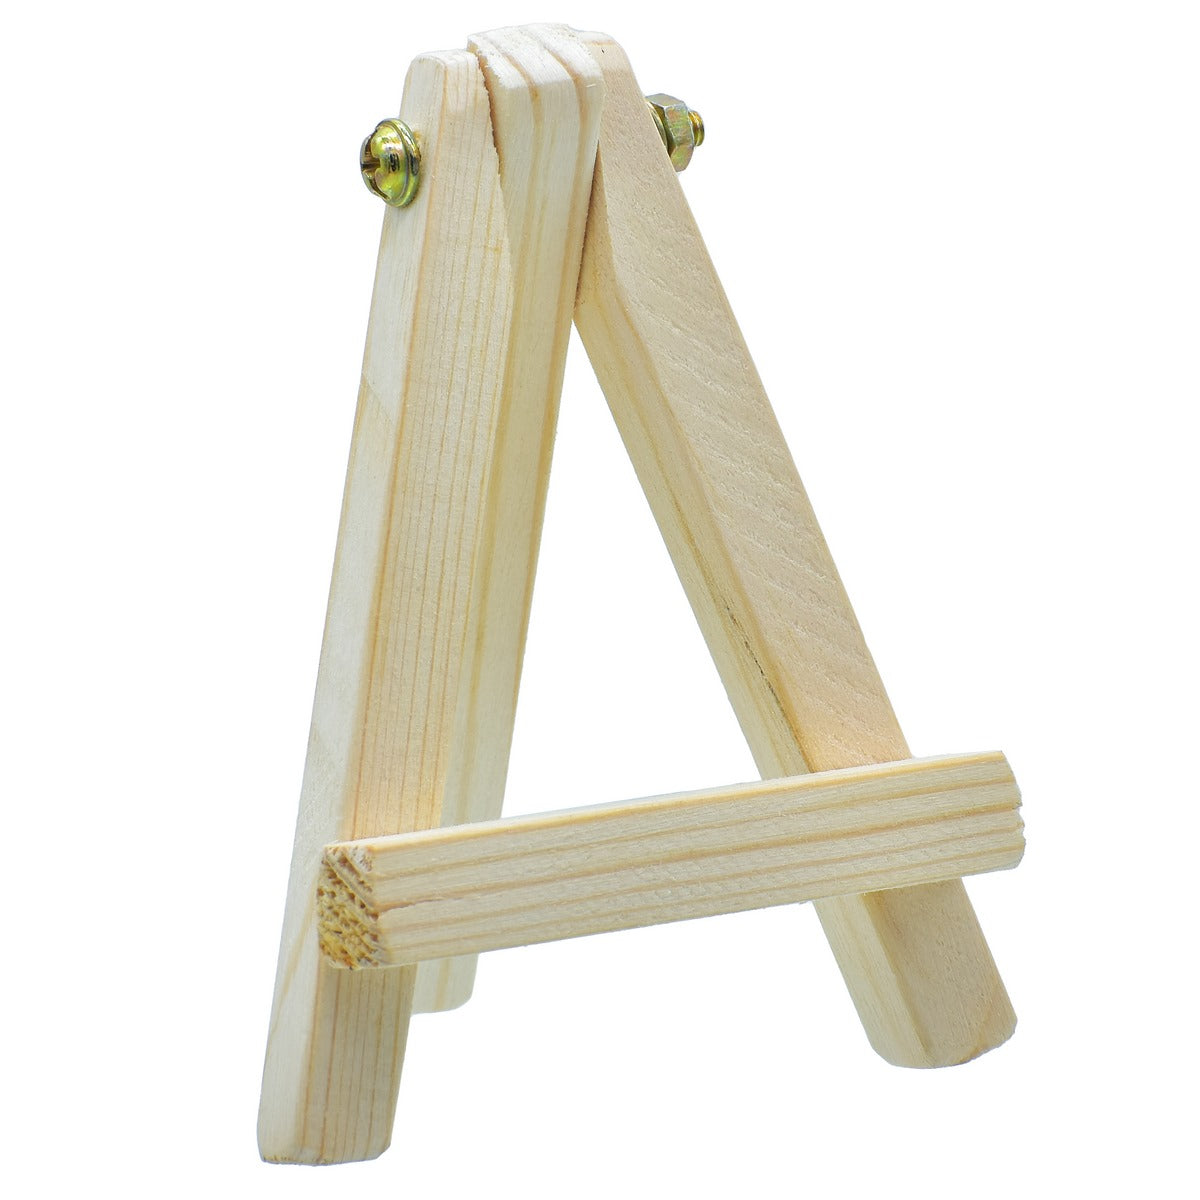 jags-mumbai Easel & Canvas Wooden Easel Stand with screw (4 Inch)